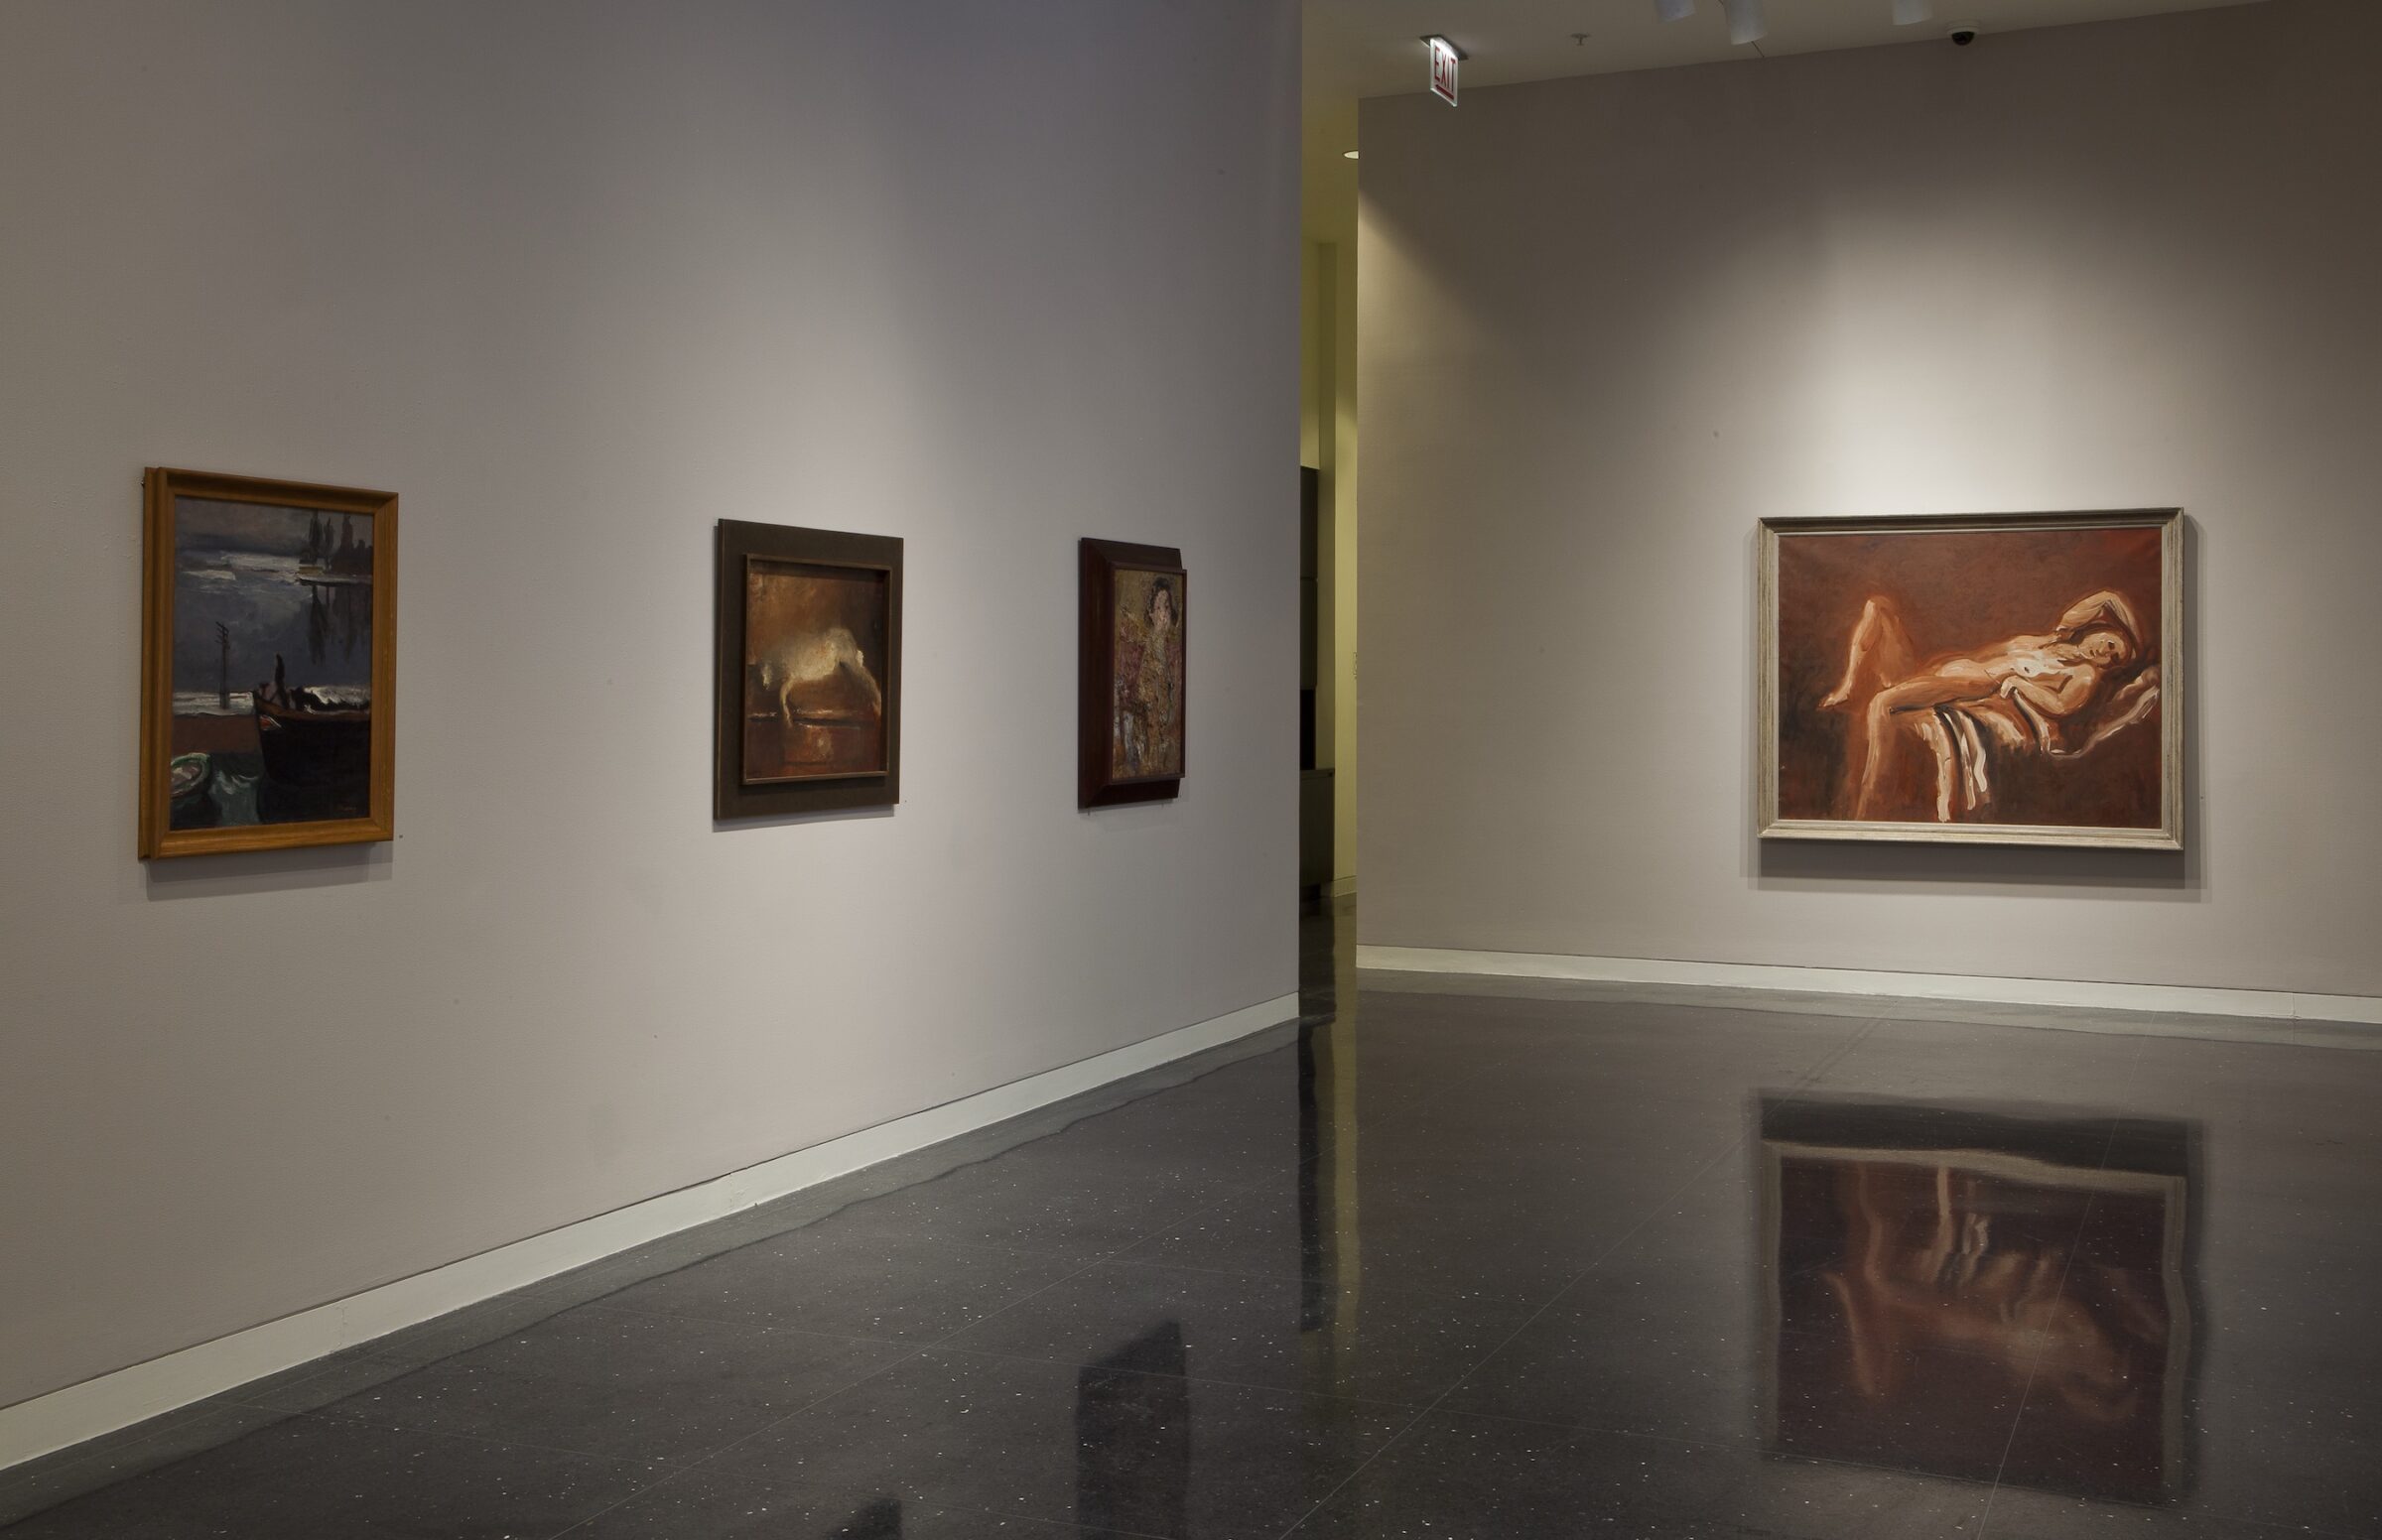 Four framed paintings of varying subjects hang in a row on a beige gallery wall. The largest painting furthest right to the viewer depicts a reclining nude.